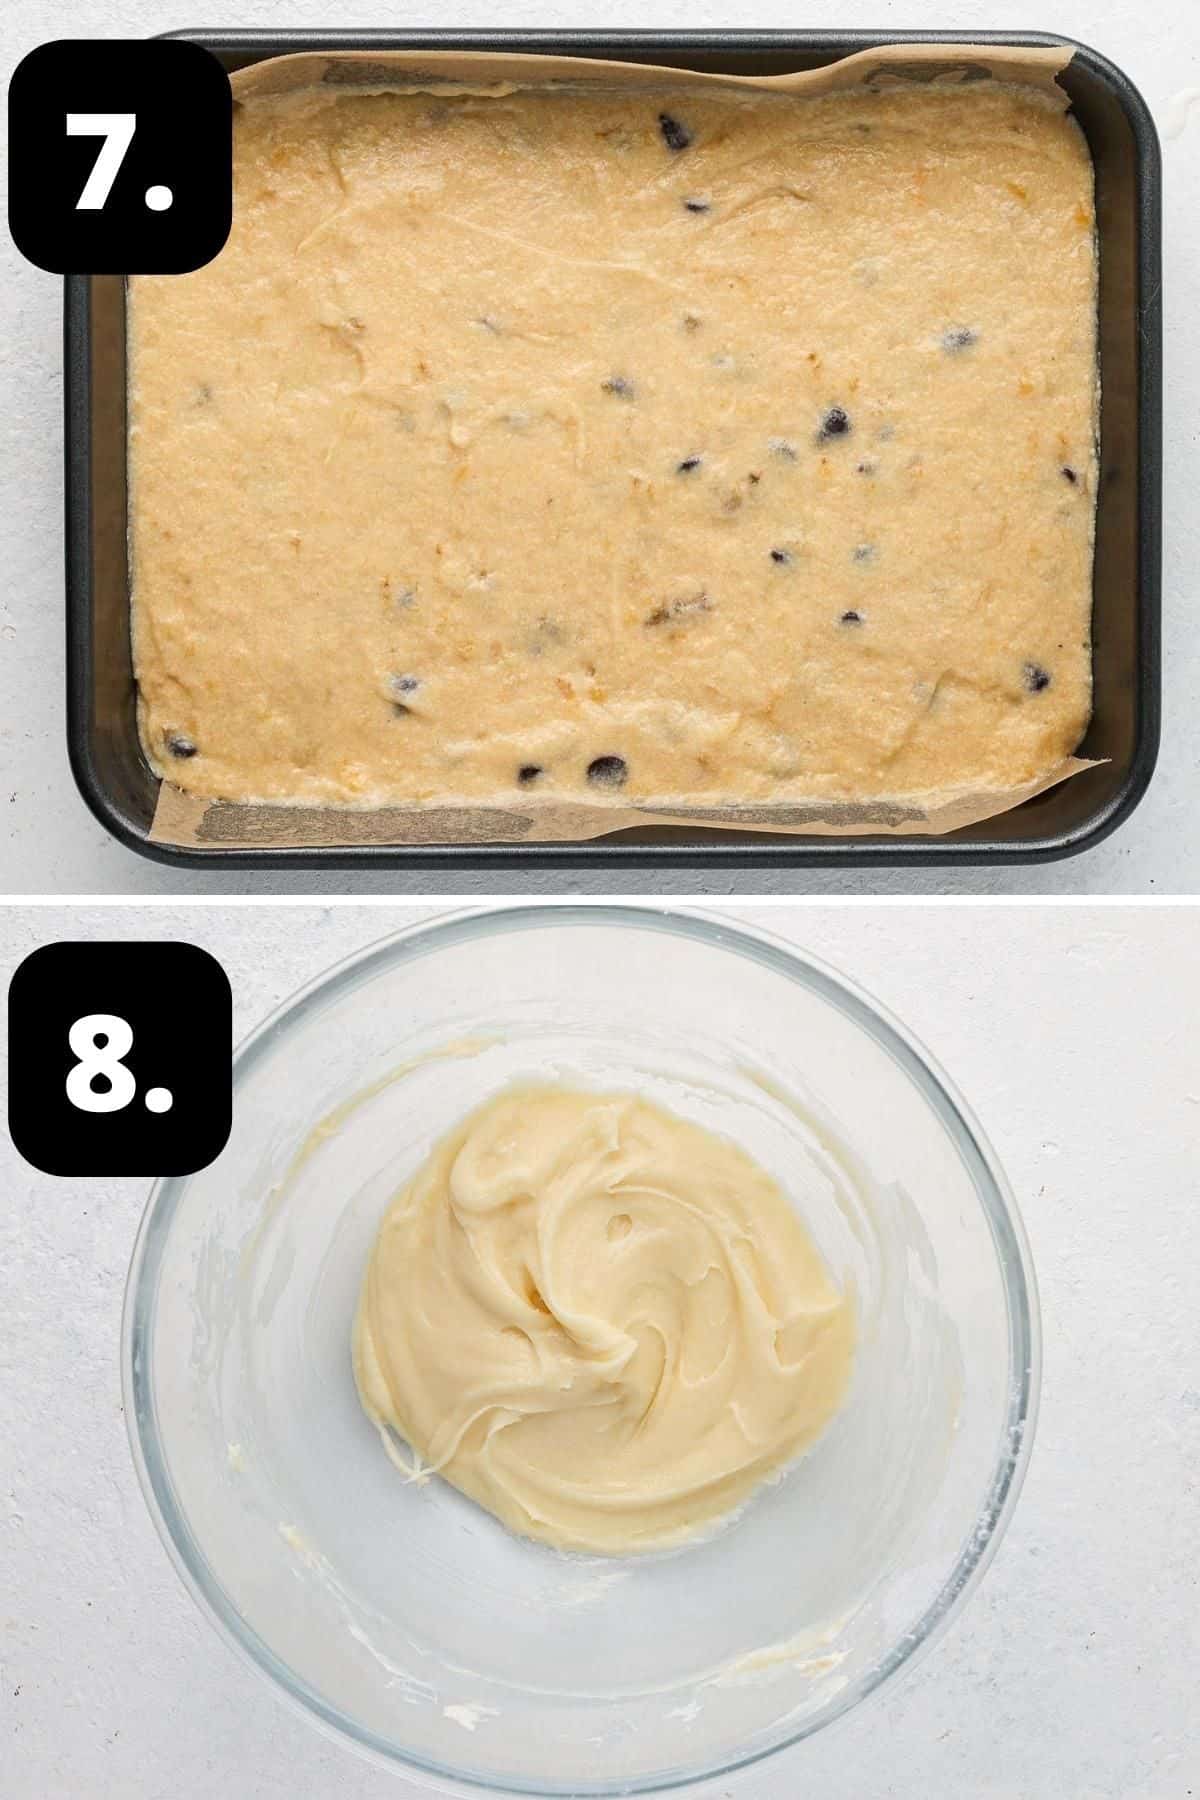 Steps 7-8 of preparing this recipe - the slice batter in baking tin ready for the oven and the cream cheese frosting in a bowl.